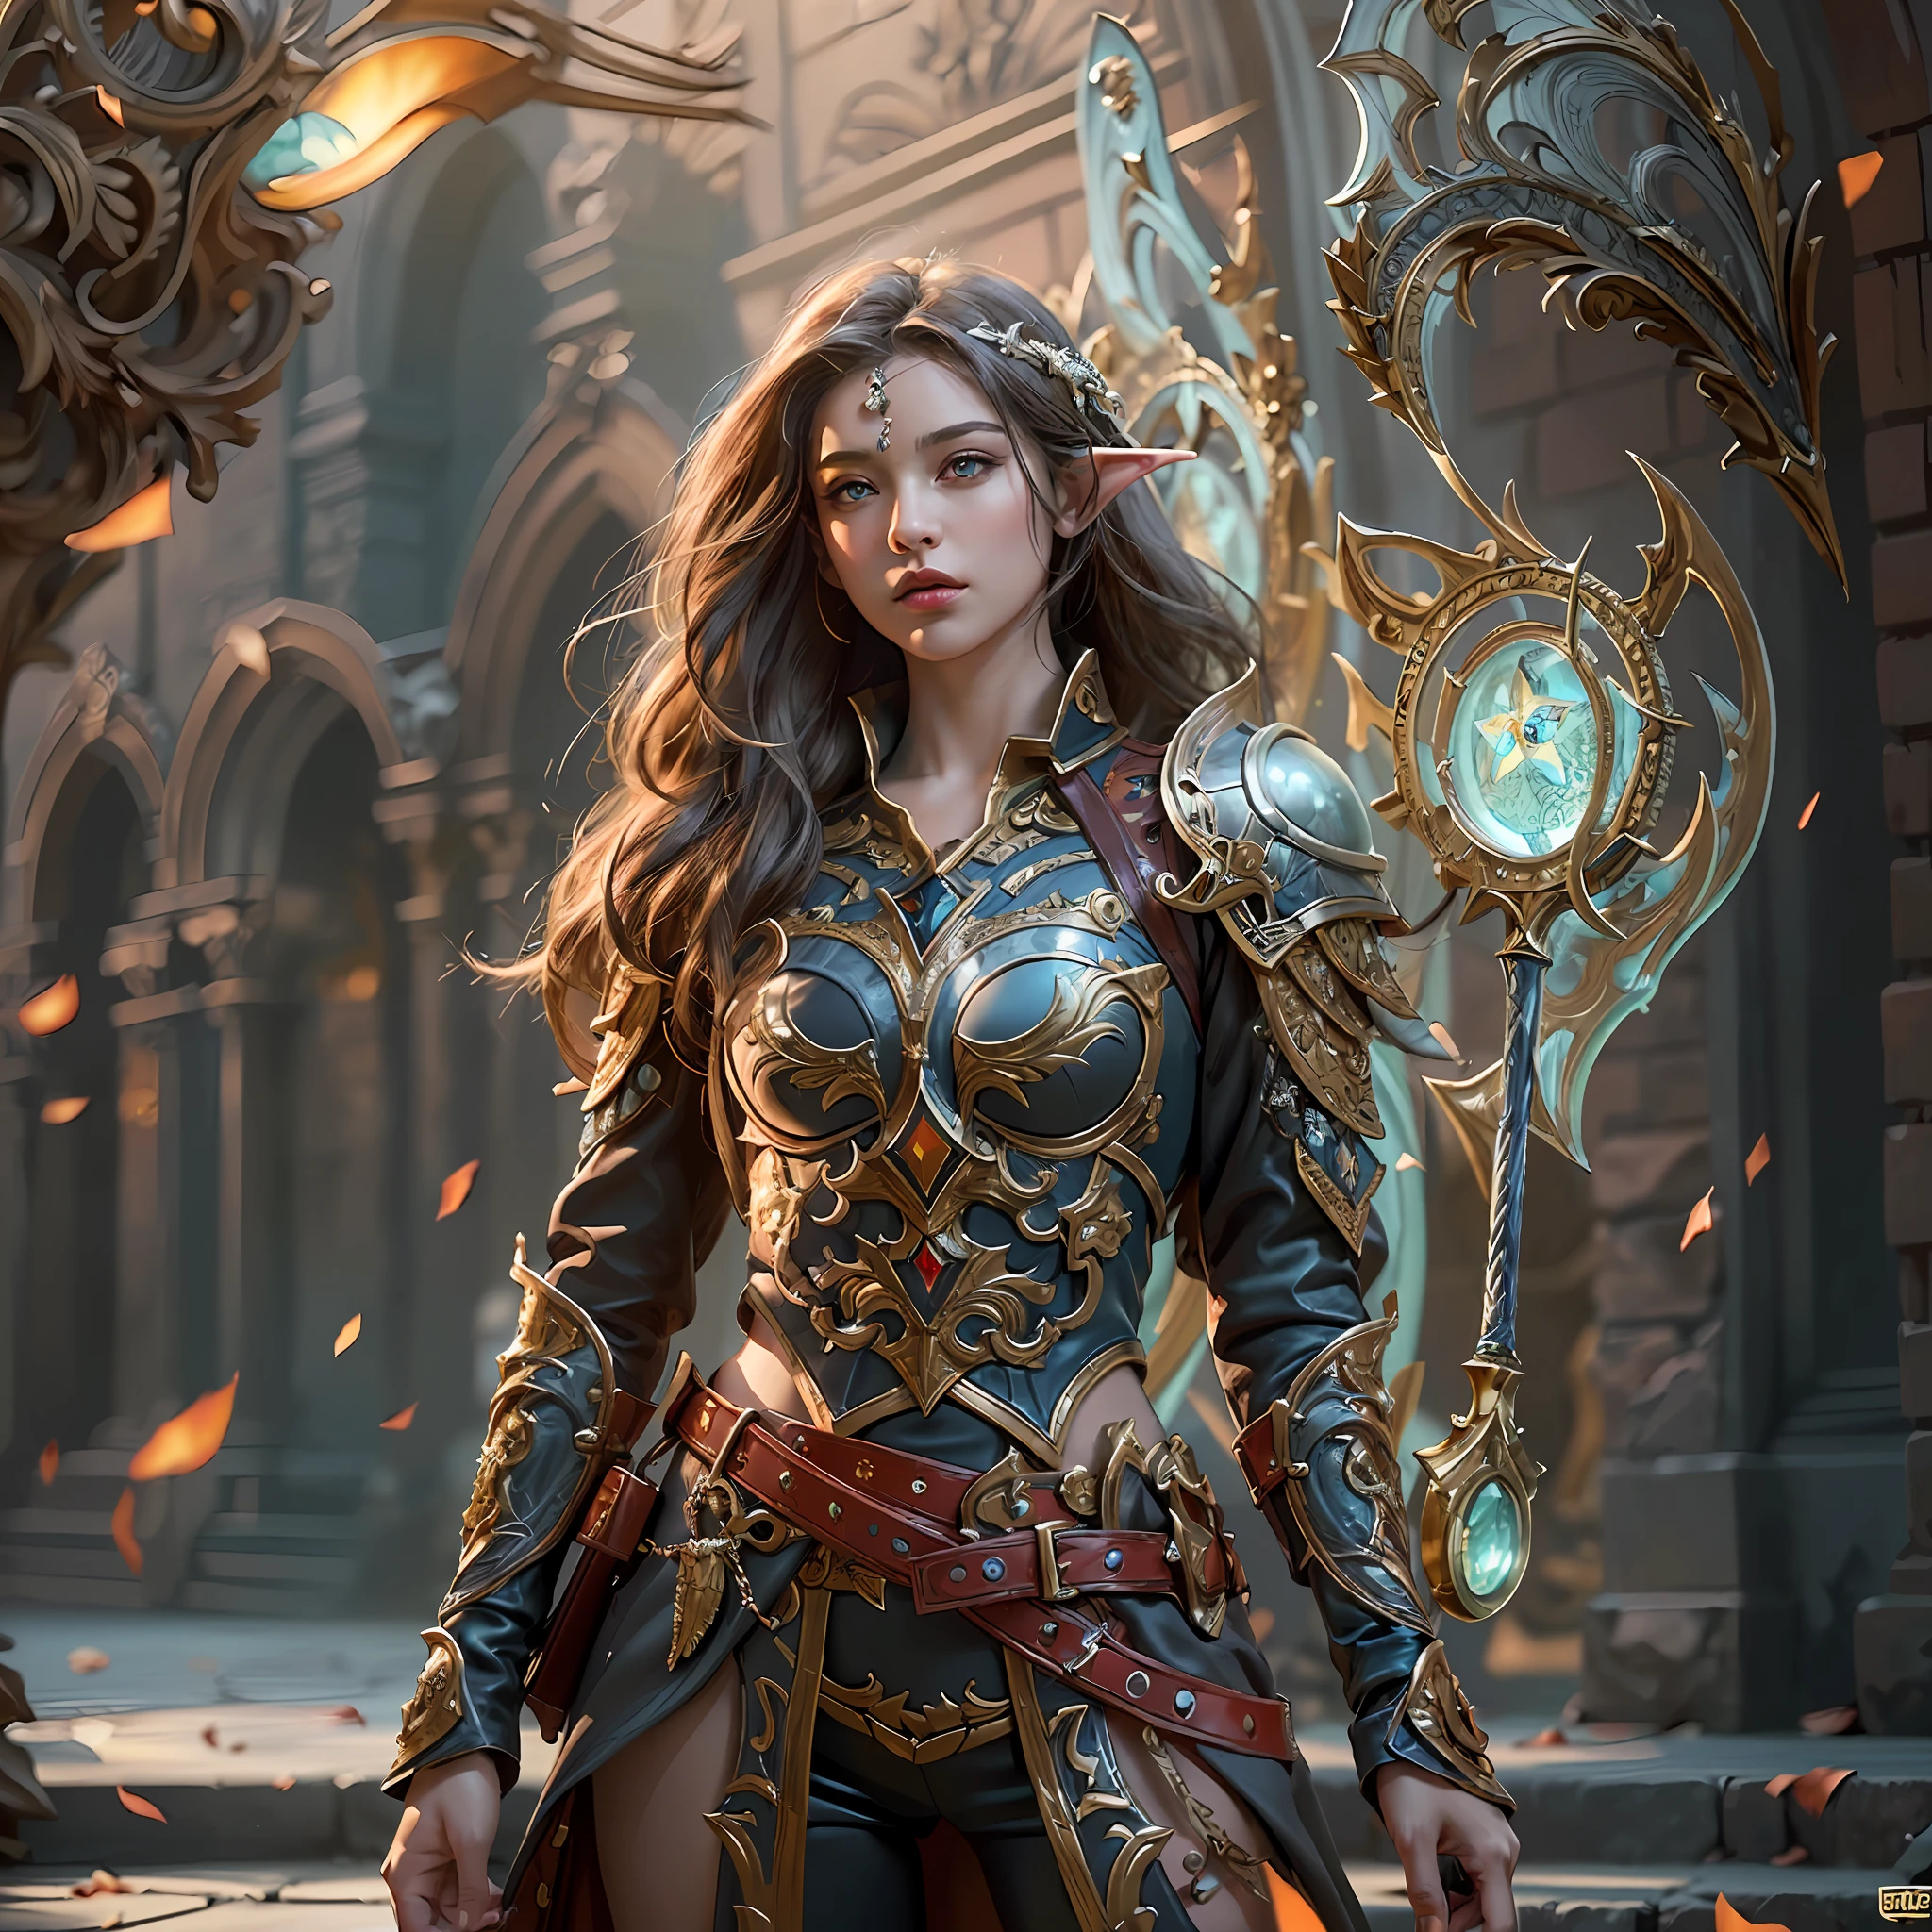 high details, best quality, 8k, [ultra detailed], masterpiece, best quality, (extremely detailed), dynamic angle, ultra wide shot, RAW, photorealistic, fantasy art, dnd art, rpg art, realistic art, a wide angle picture of an epic female elf arcane warrior, warrior of magic, fighter of the arcana, full body, [[anatomically correct]] full body (1.5 intricate details, Masterpiece, best quality) casting a spell (1.5 intricate details, Masterpiece, best quality), casting an epic spell, [colorful magical sigils in the air],[ colorful arcane markings floating] (1.6 intricate details, Masterpiece, best quality) holding an [epic magical sword] (1.5 intricate details, Masterpiece, best quality) holding epic [magical sword glowing in red light]. in fantasy urban street (1.5 intricate details, Masterpiece, best quality), a female beautiful epic elf wearing elven leather armor (1.4 intricate details, Masterpiece, best quality), high heeled leather boots, ultra detailed face,  thick hair, long hair, dynamic hair, fair skin intense eyes, fantasy city background (intense details), sun light, backlight, depth of field (1.4 intricate details, Masterpiece, best quality), dynamic angle, (1.4 intricate details, Masterpiece, best quality) 3D rendering, high details, best quality, highres, ultra wide angle